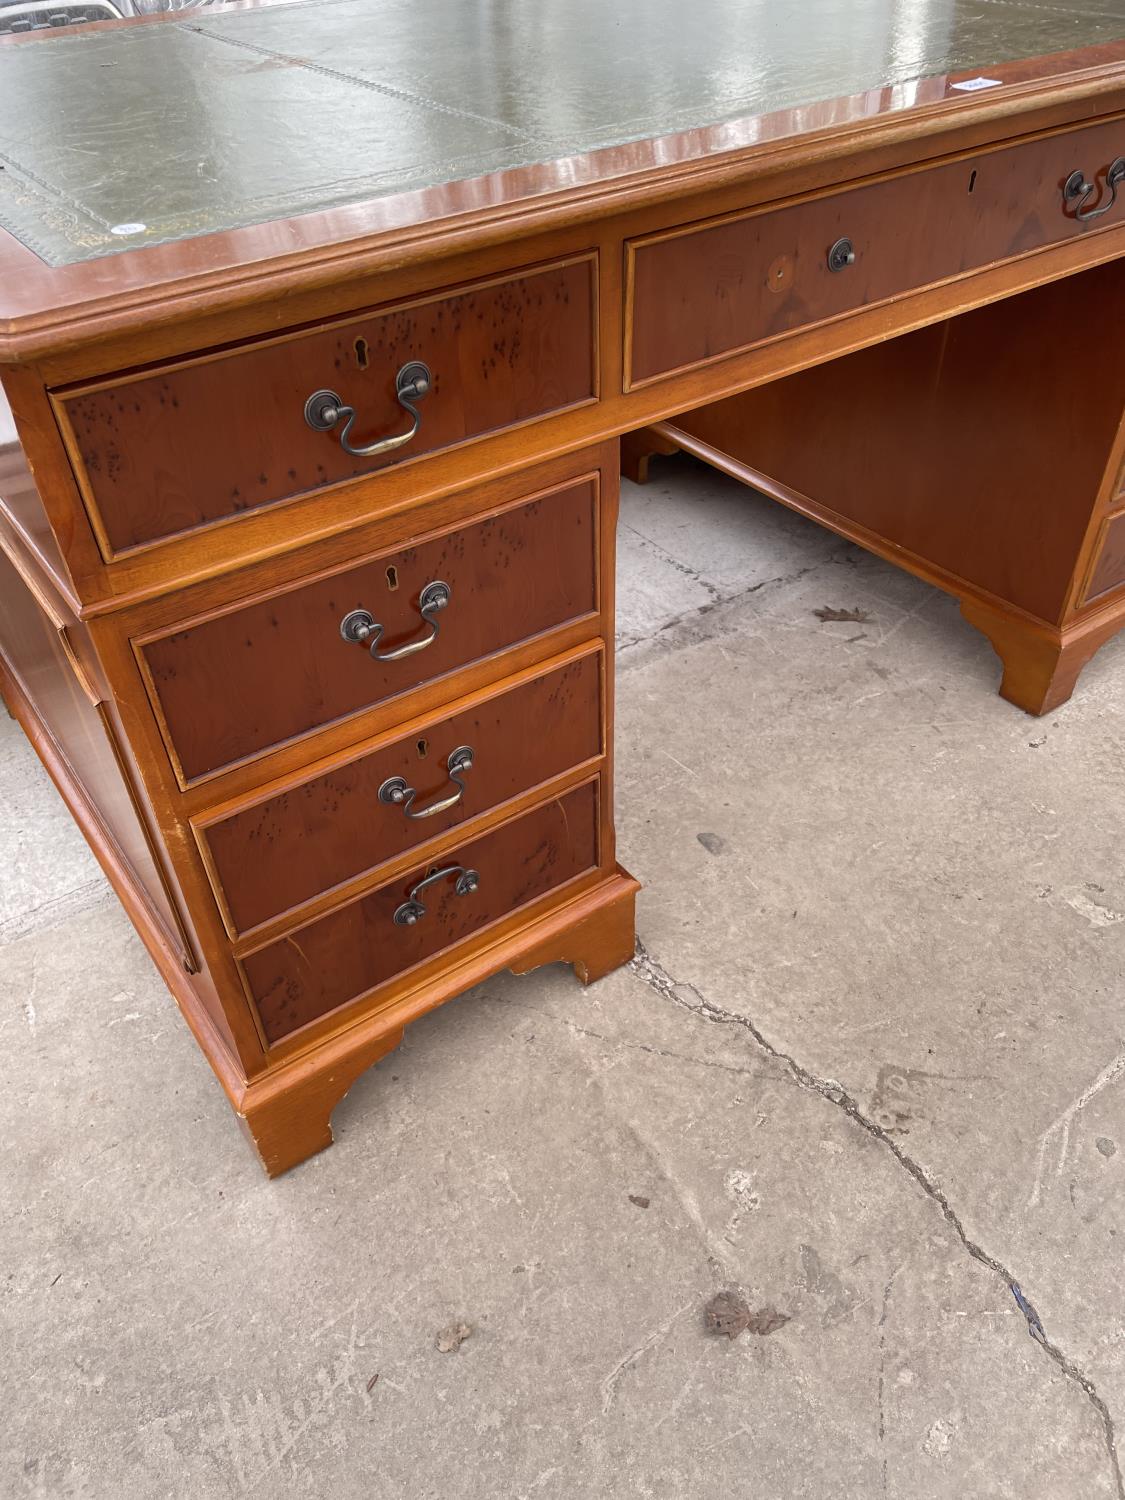 A REPRODUCTION YEW WOOD TWIN PEDESTAL DESK ENCLOSING NINE DRAWERS WITH INSET LEATHER TOP 60" X 36" - Image 3 of 4